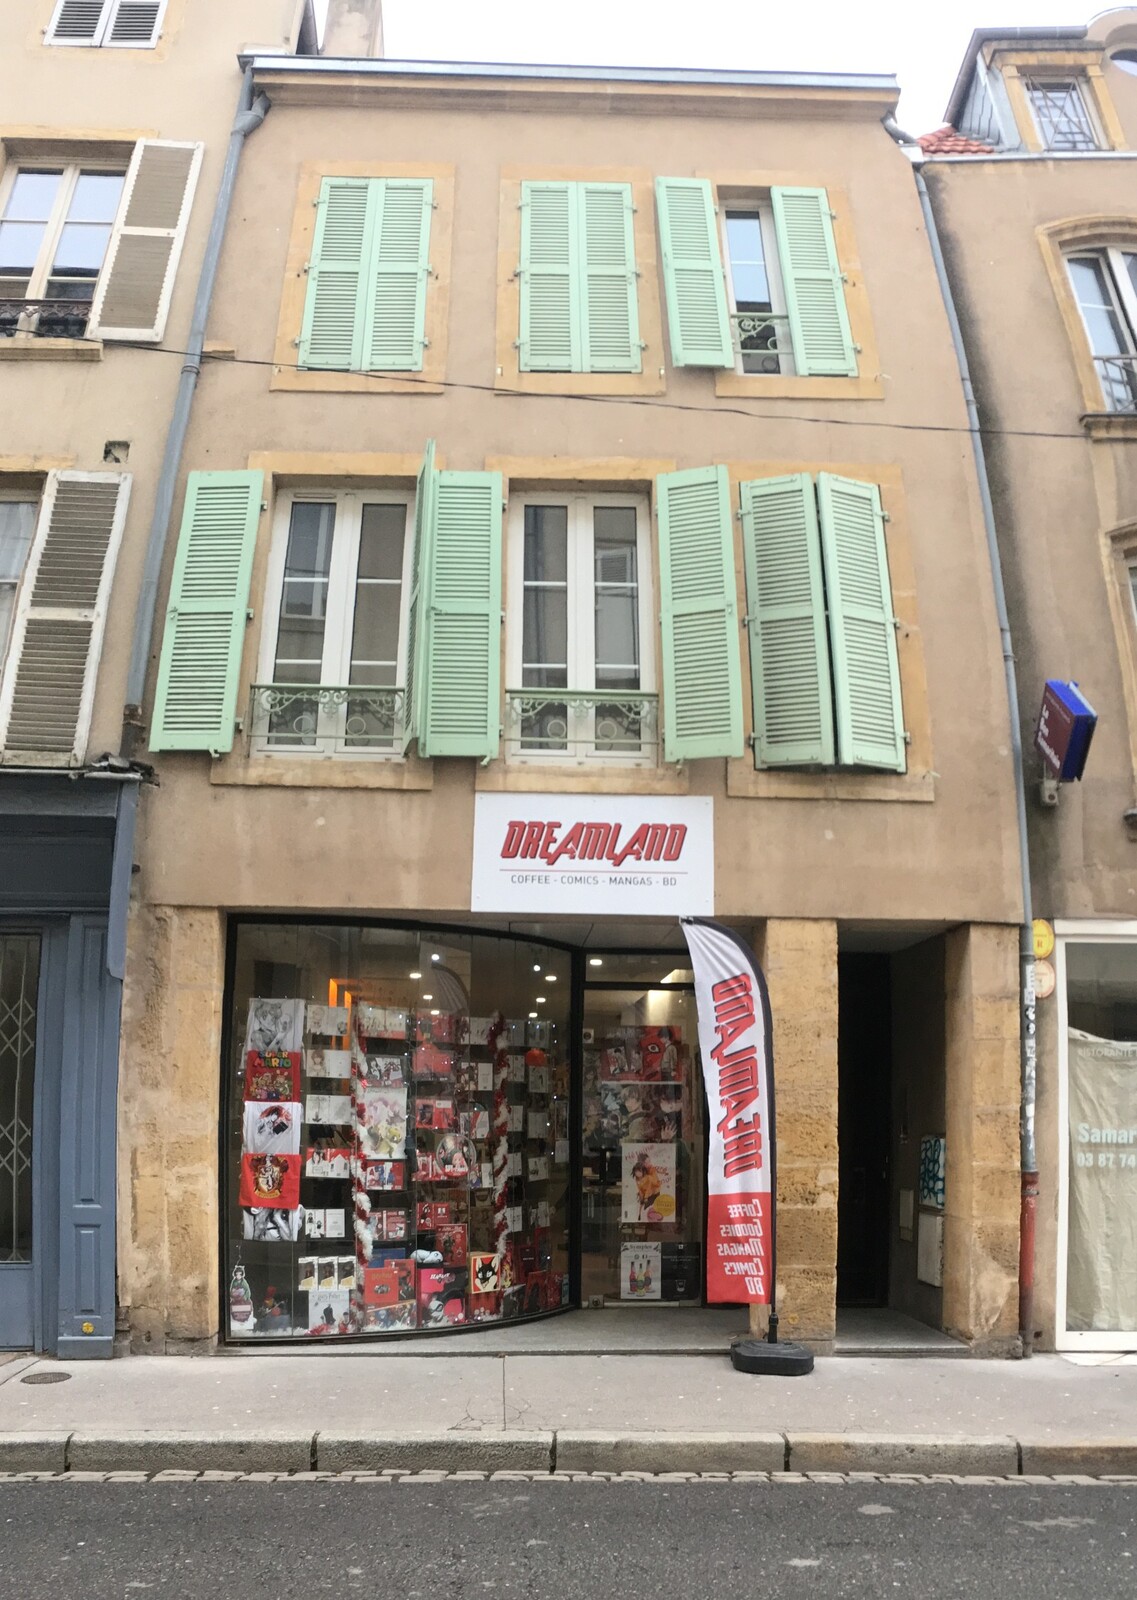 The real store, for reference